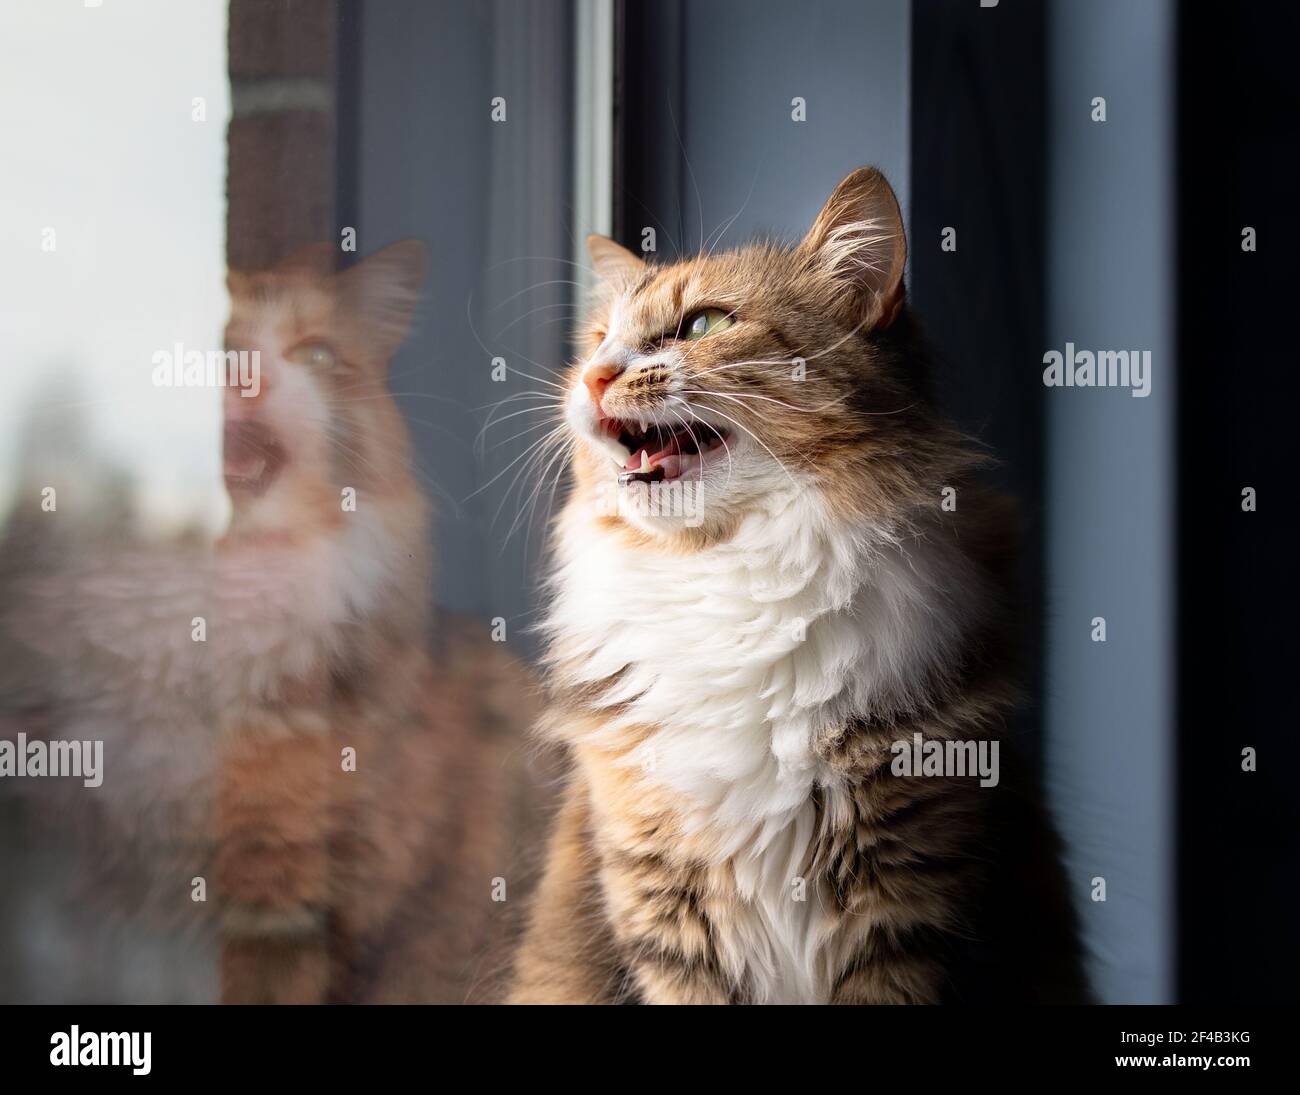 Cat chirping or chattering. Cute kitty sitting on windowsill while vocalizing with mouth wide open. Concept for why cats chirp sounds or cat talking. Stock Photo